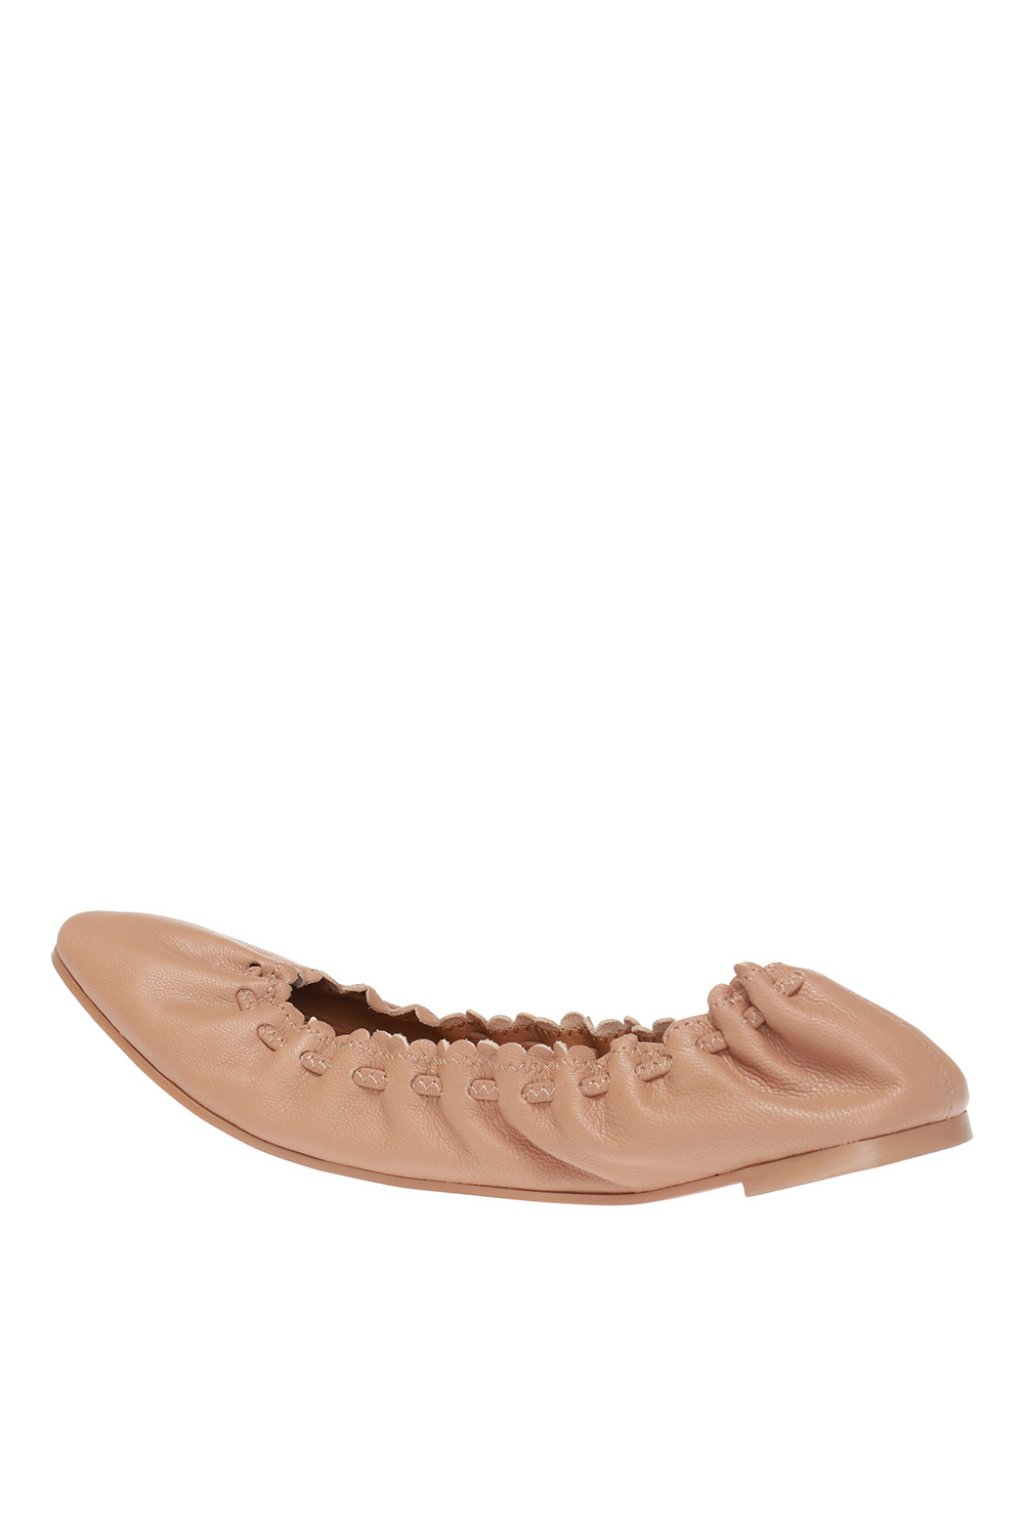 See By Chloe Ballet flats with woven details